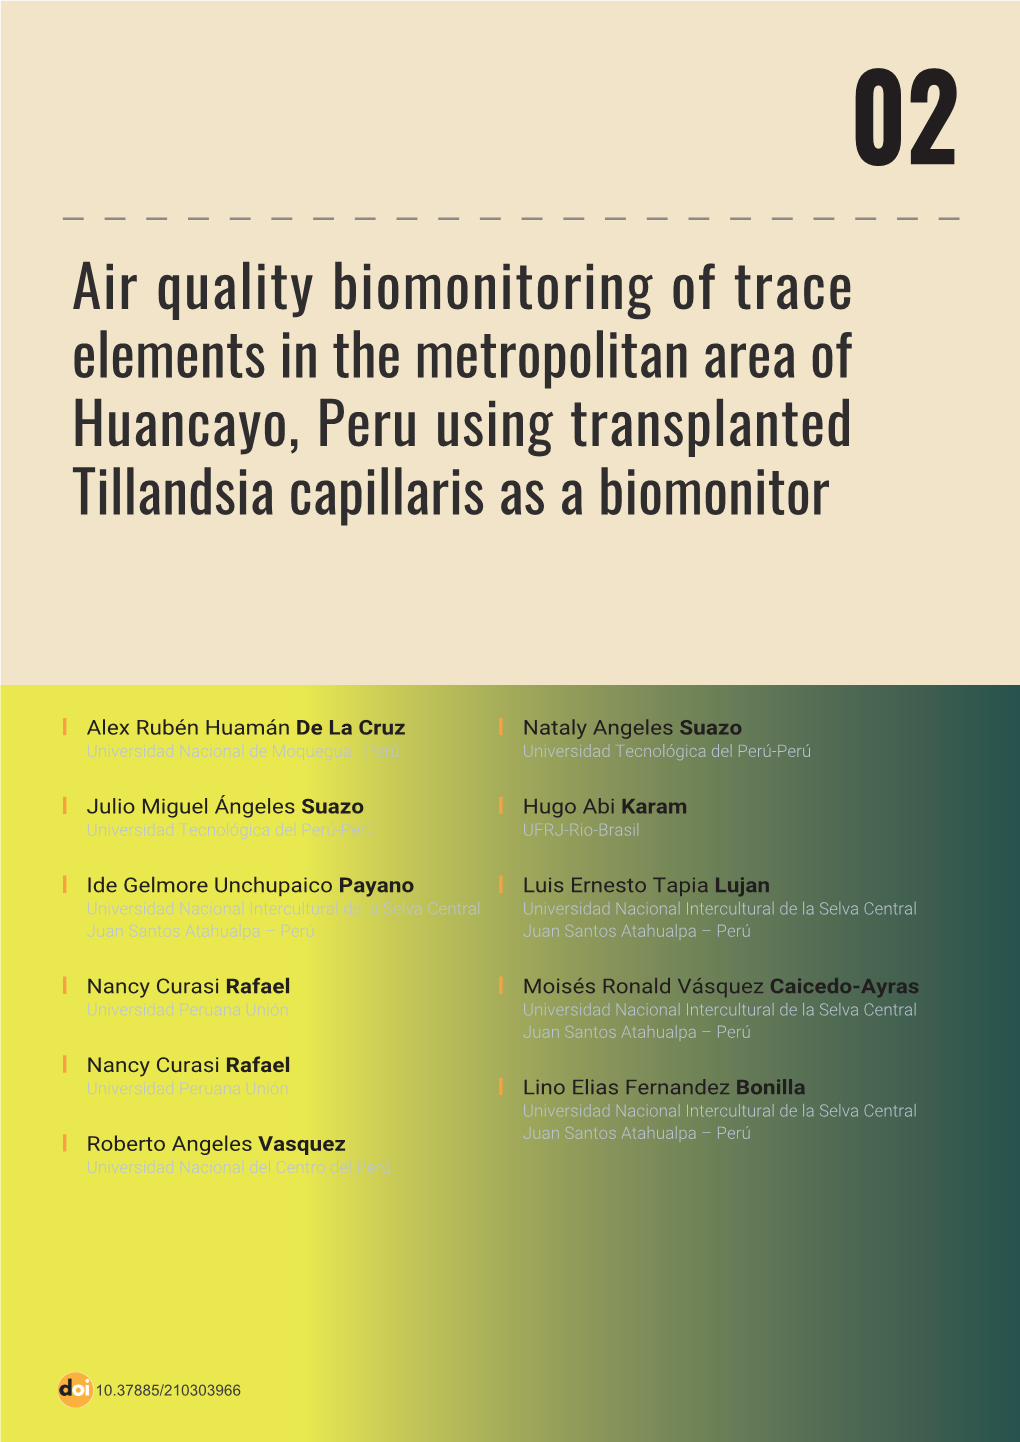 Air Quality Biomonitoring of Trace Elements in the Metropolitan Area of Huancayo, Peru Using Transplanted Tillandsia Capillaris As a Biomonitor